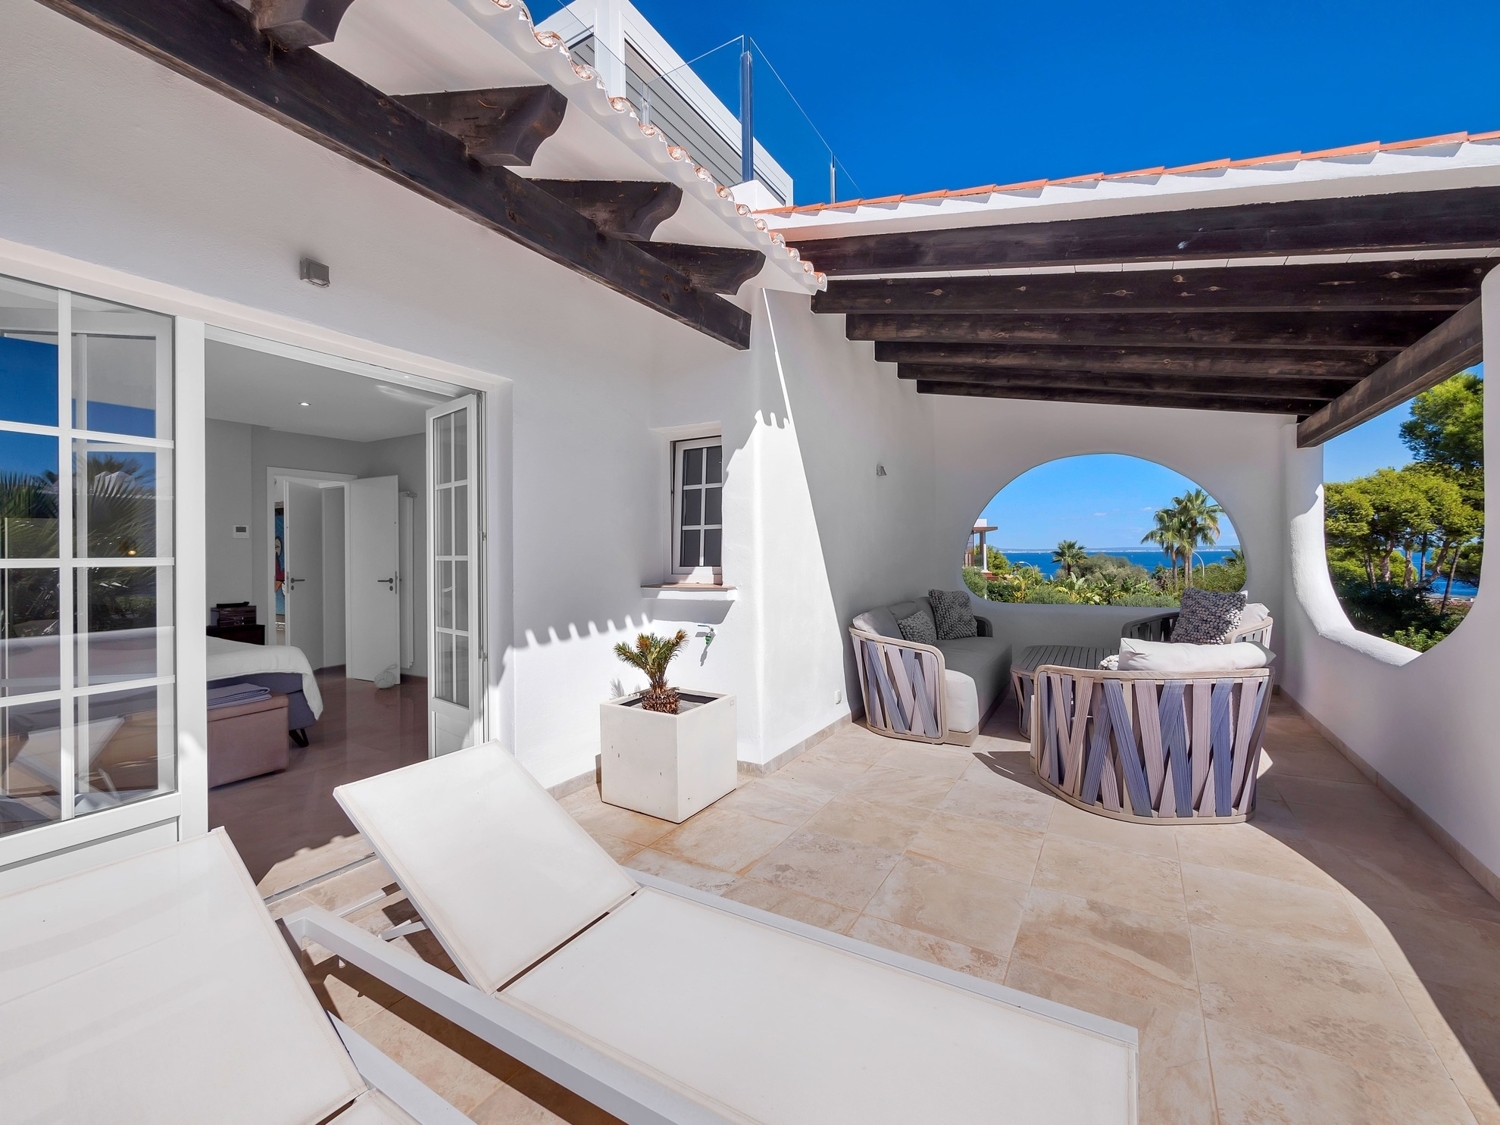 Charming Ibicencan style villa with holiday licence, sea views, pool and jacuzzi